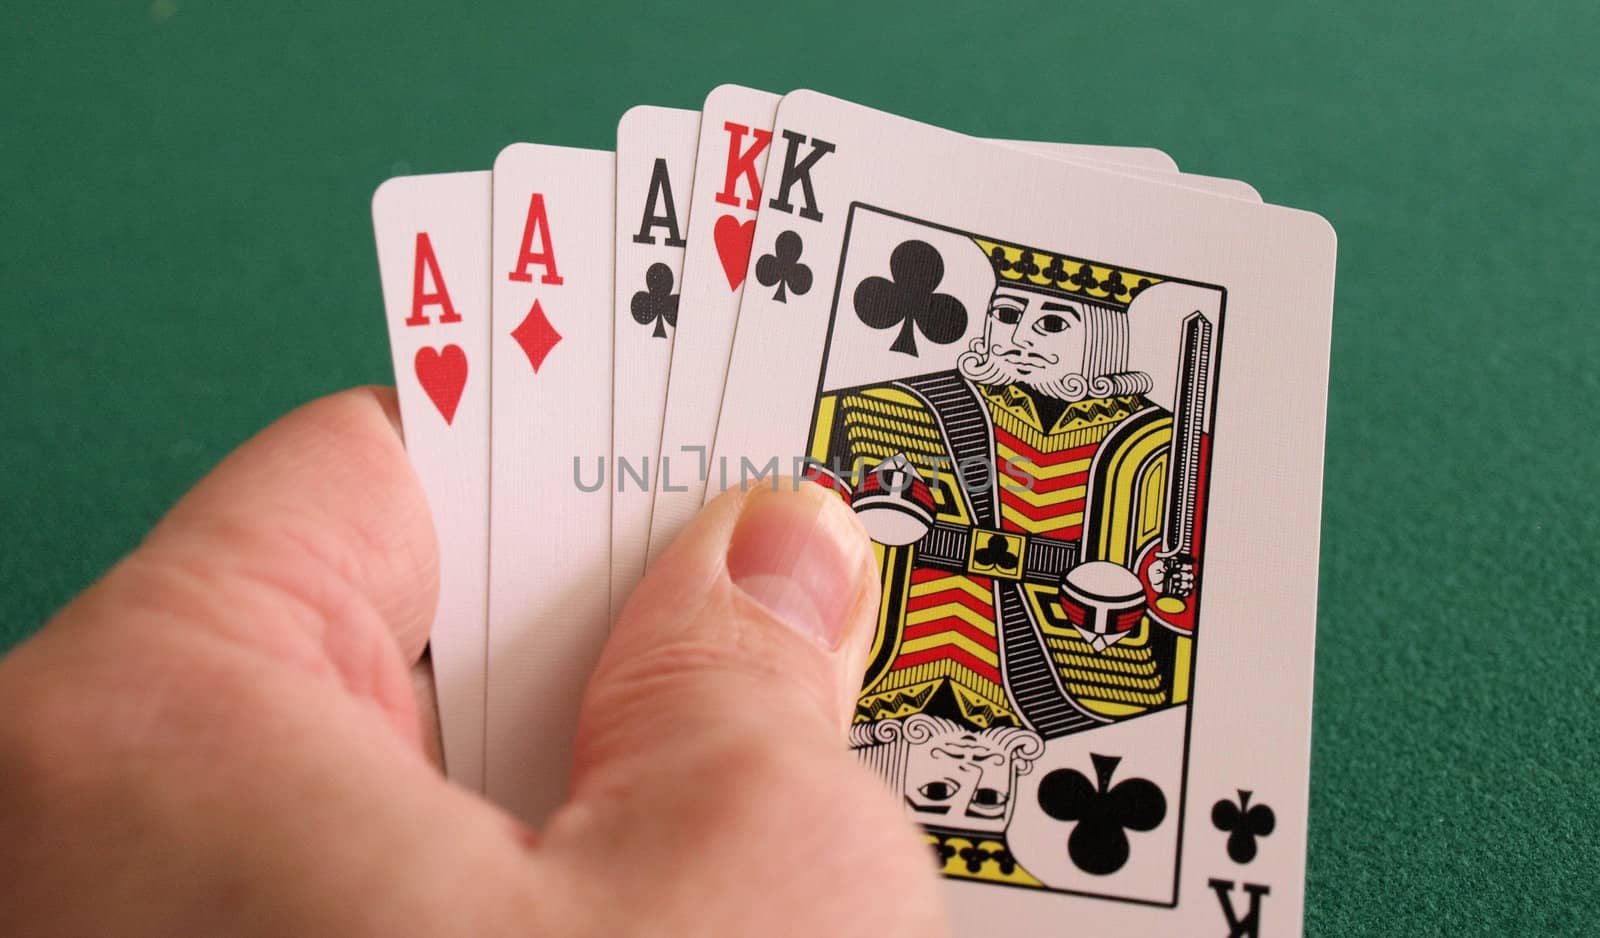 A great poker hand with aces and kings